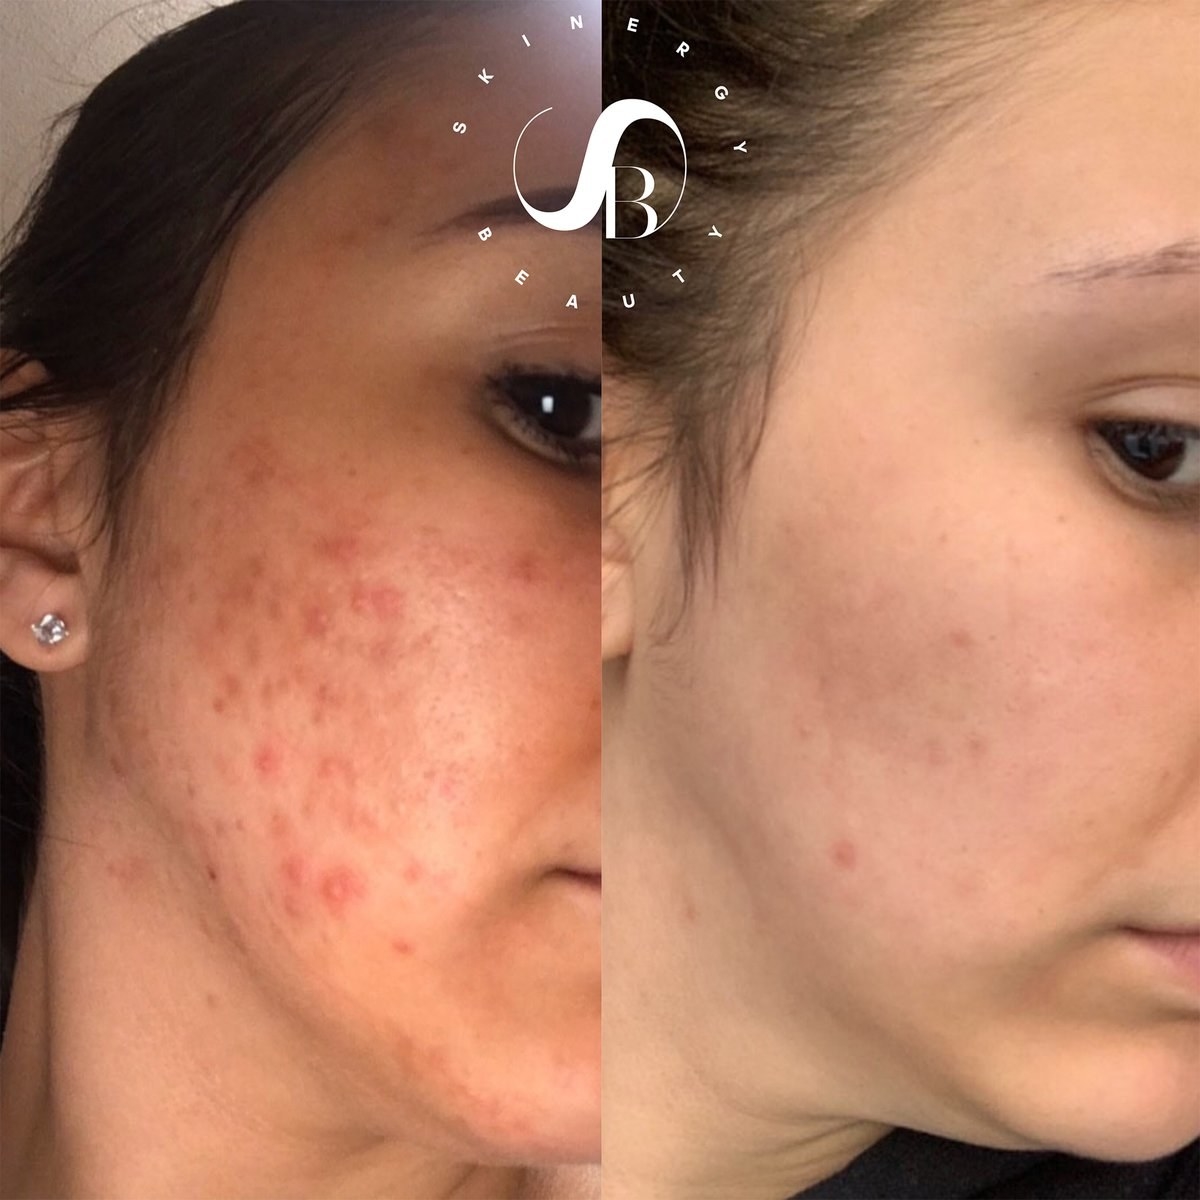 before and after images of a model whose acne disappears